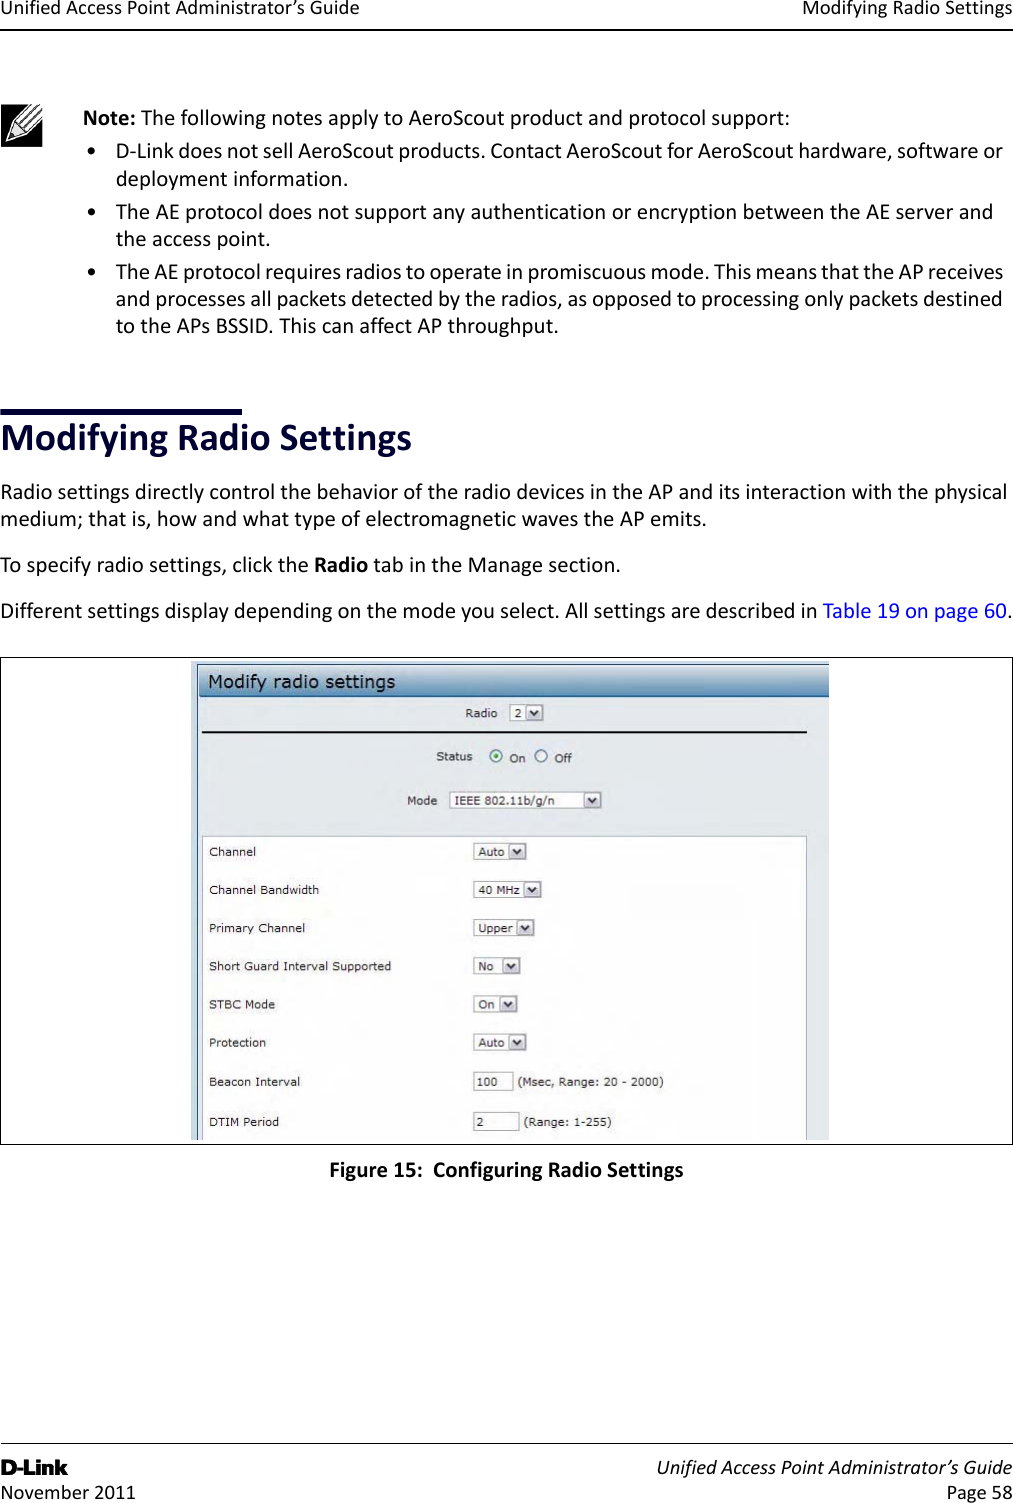 ModifyingRadioSettingsD-Link UnifiedAccessPointAdministrator’sGuide November2011 Page58UnifiedAccessPointAdministrator’sGuideModifyingRadioSettingsRadiosettingsdirectlycontrolthebehavioroftheradiodevicesintheAPanditsinteractionwiththephysicalmedium;thatis,howandwhattypeofelectromagneticwavestheAPemits.Tospecifyradiosettings,clicktheRadiotabintheManagesection.Differentsettingsdisplaydependingonthemodeyouselect.AllsettingsaredescribedinTable19onpage60.Figure15:ConfiguringRadioSettingsNote:ThefollowingnotesapplytoAeroScoutproductandprotocolsupport:•D‐LinkdoesnotsellAeroScoutproducts.ContactAeroScoutforAeroScouthardware,softwareordeploymentinformation.•TheAEprotocoldoesnotsupportanyauthenticationorencryptionbetweentheAEserverandtheaccesspoint.•TheAEprotocolrequiresradiostooperateinpromiscuousmode.ThismeansthattheAPreceivesandprocessesallpacketsdetectedbytheradios,asopposedtoprocessingonlypacketsdestinedtotheAPsBSSID.ThiscanaffectAPthroughput.